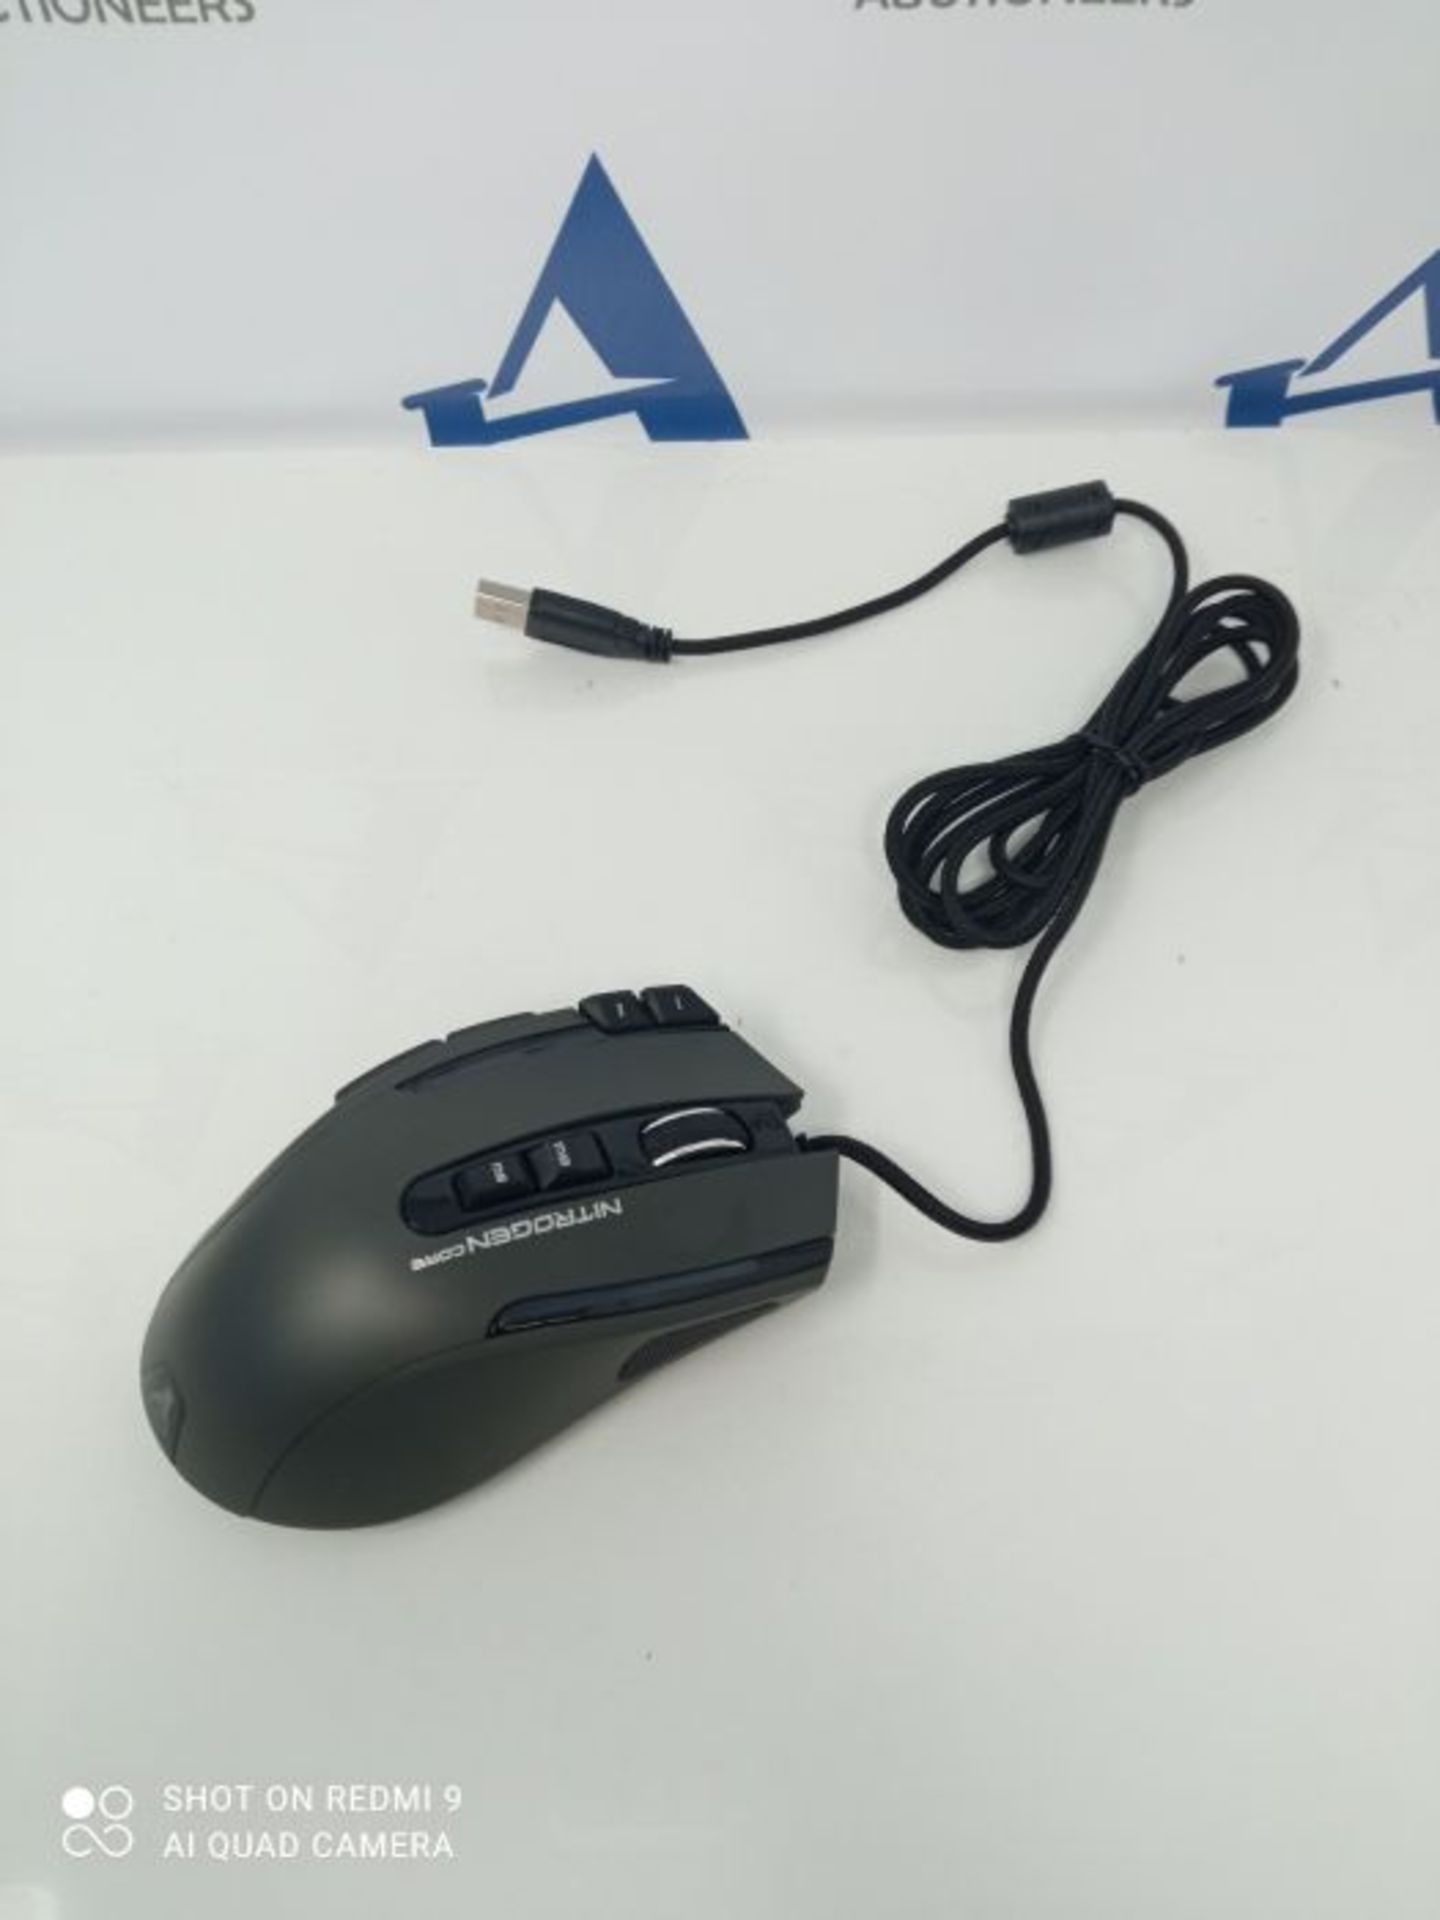 G-LAB Kult NITROGEN Core High Performance Wired Gaming Mouse - Avago 10,000 DPI Optica - Image 2 of 2